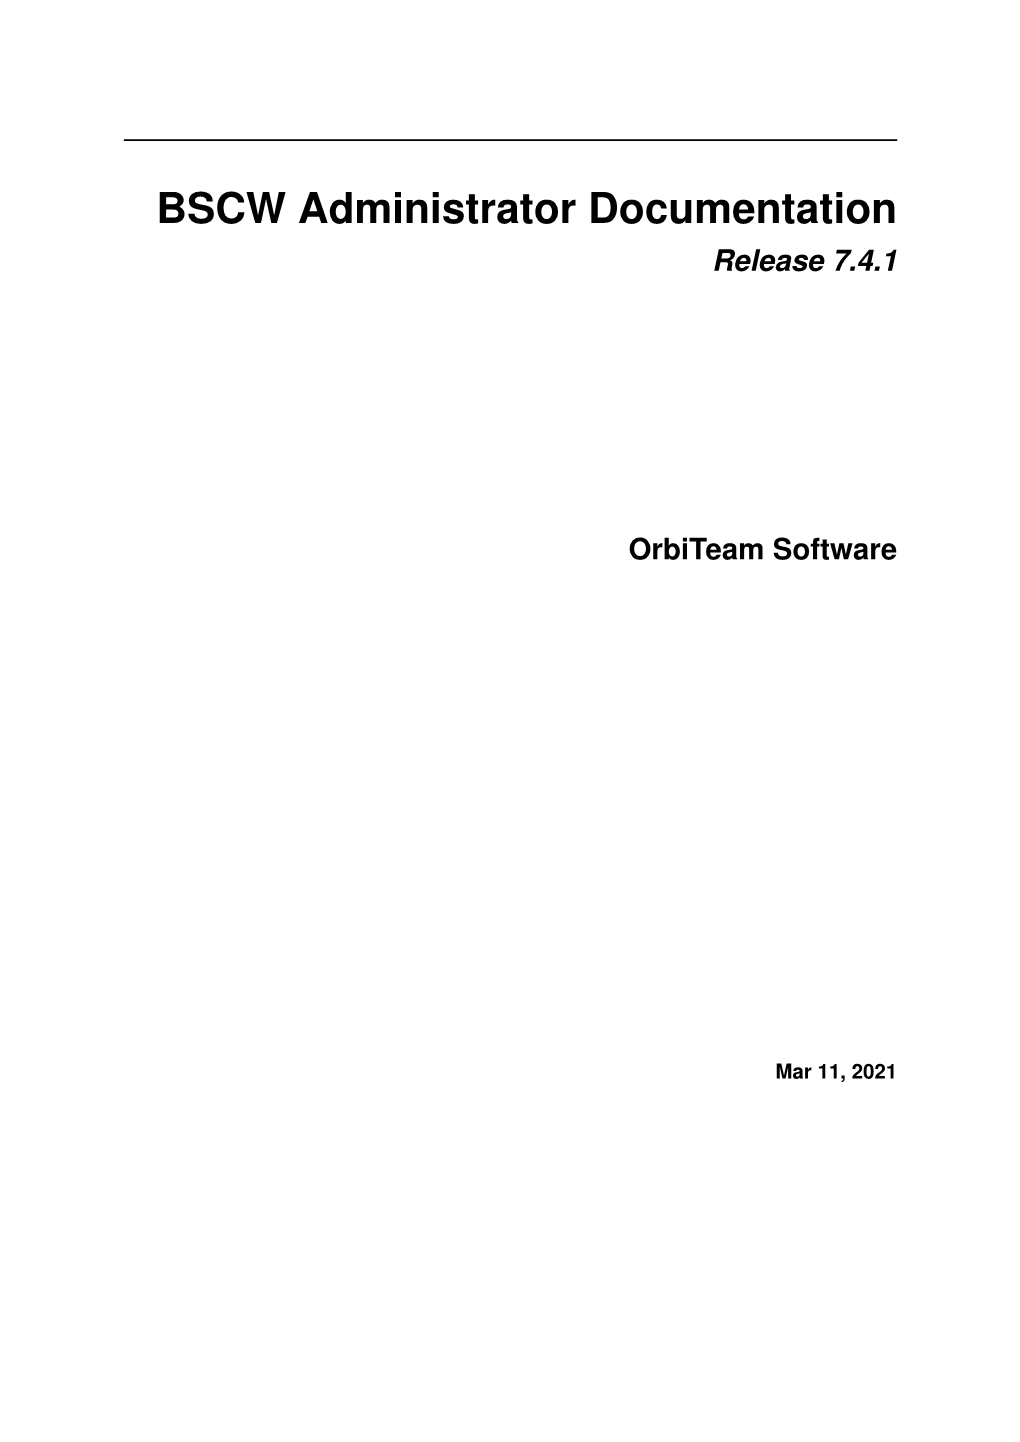 BSCW Administrator Documentation Release 7.4.1